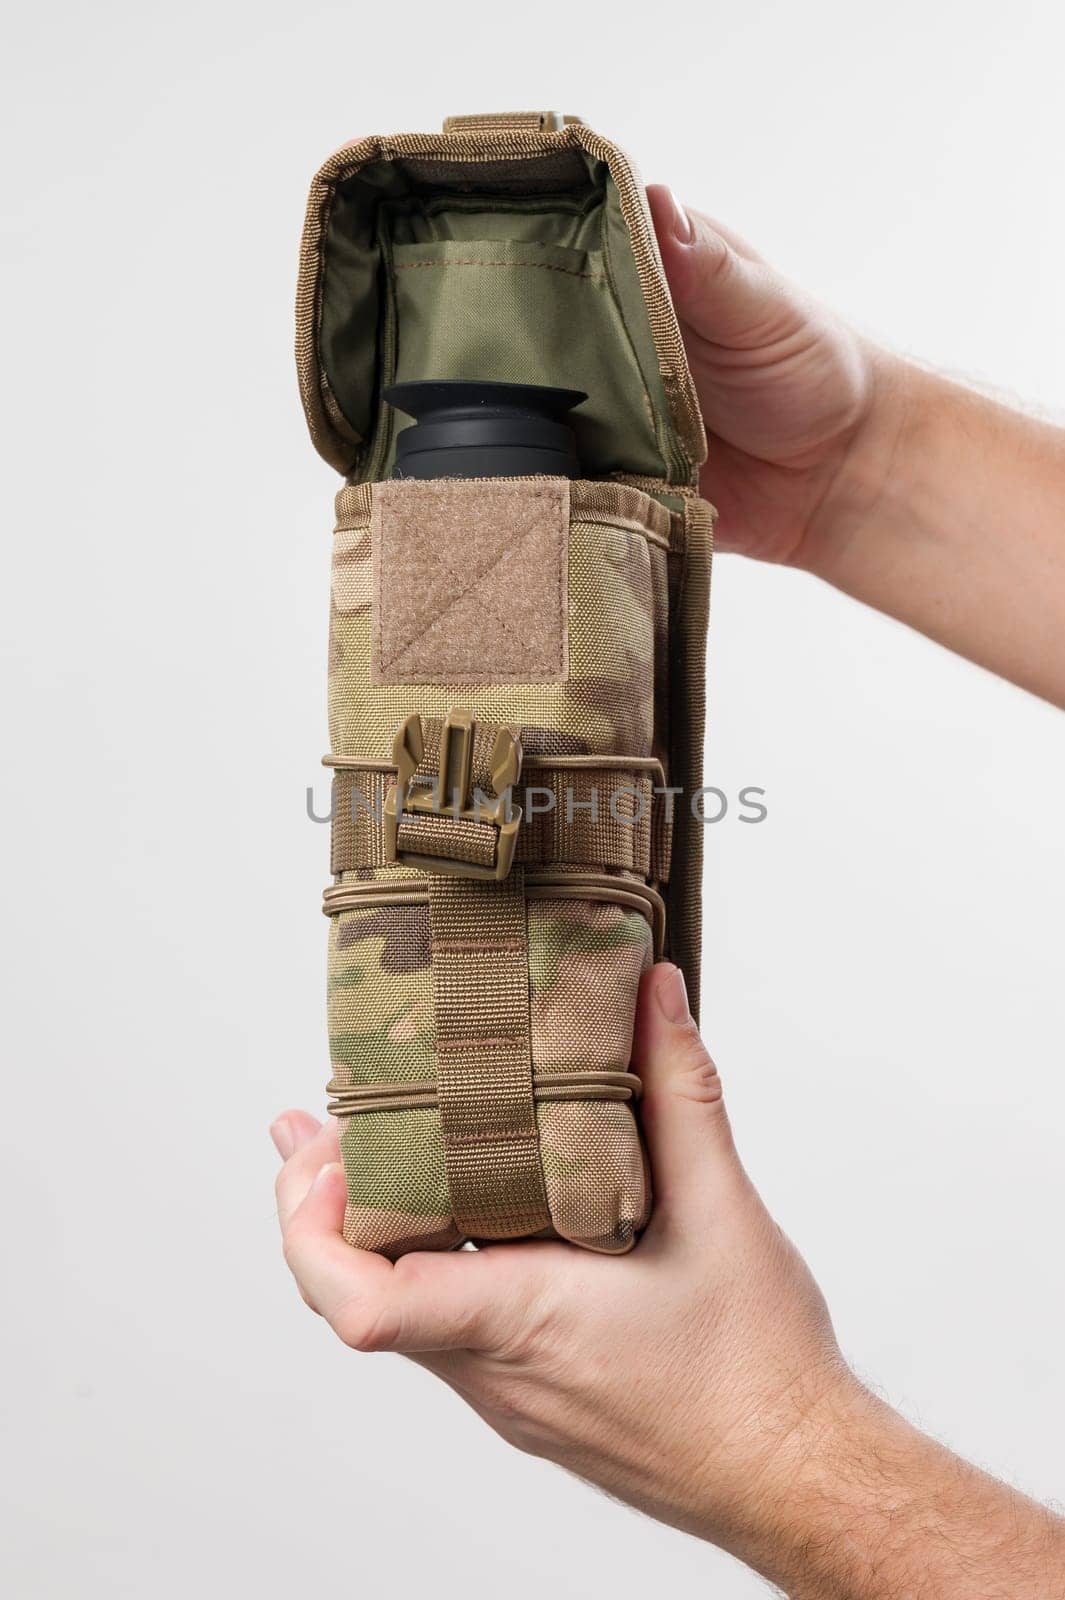 The bag is a military-style pixel case for storing a monocular. by Niko_Cingaryuk